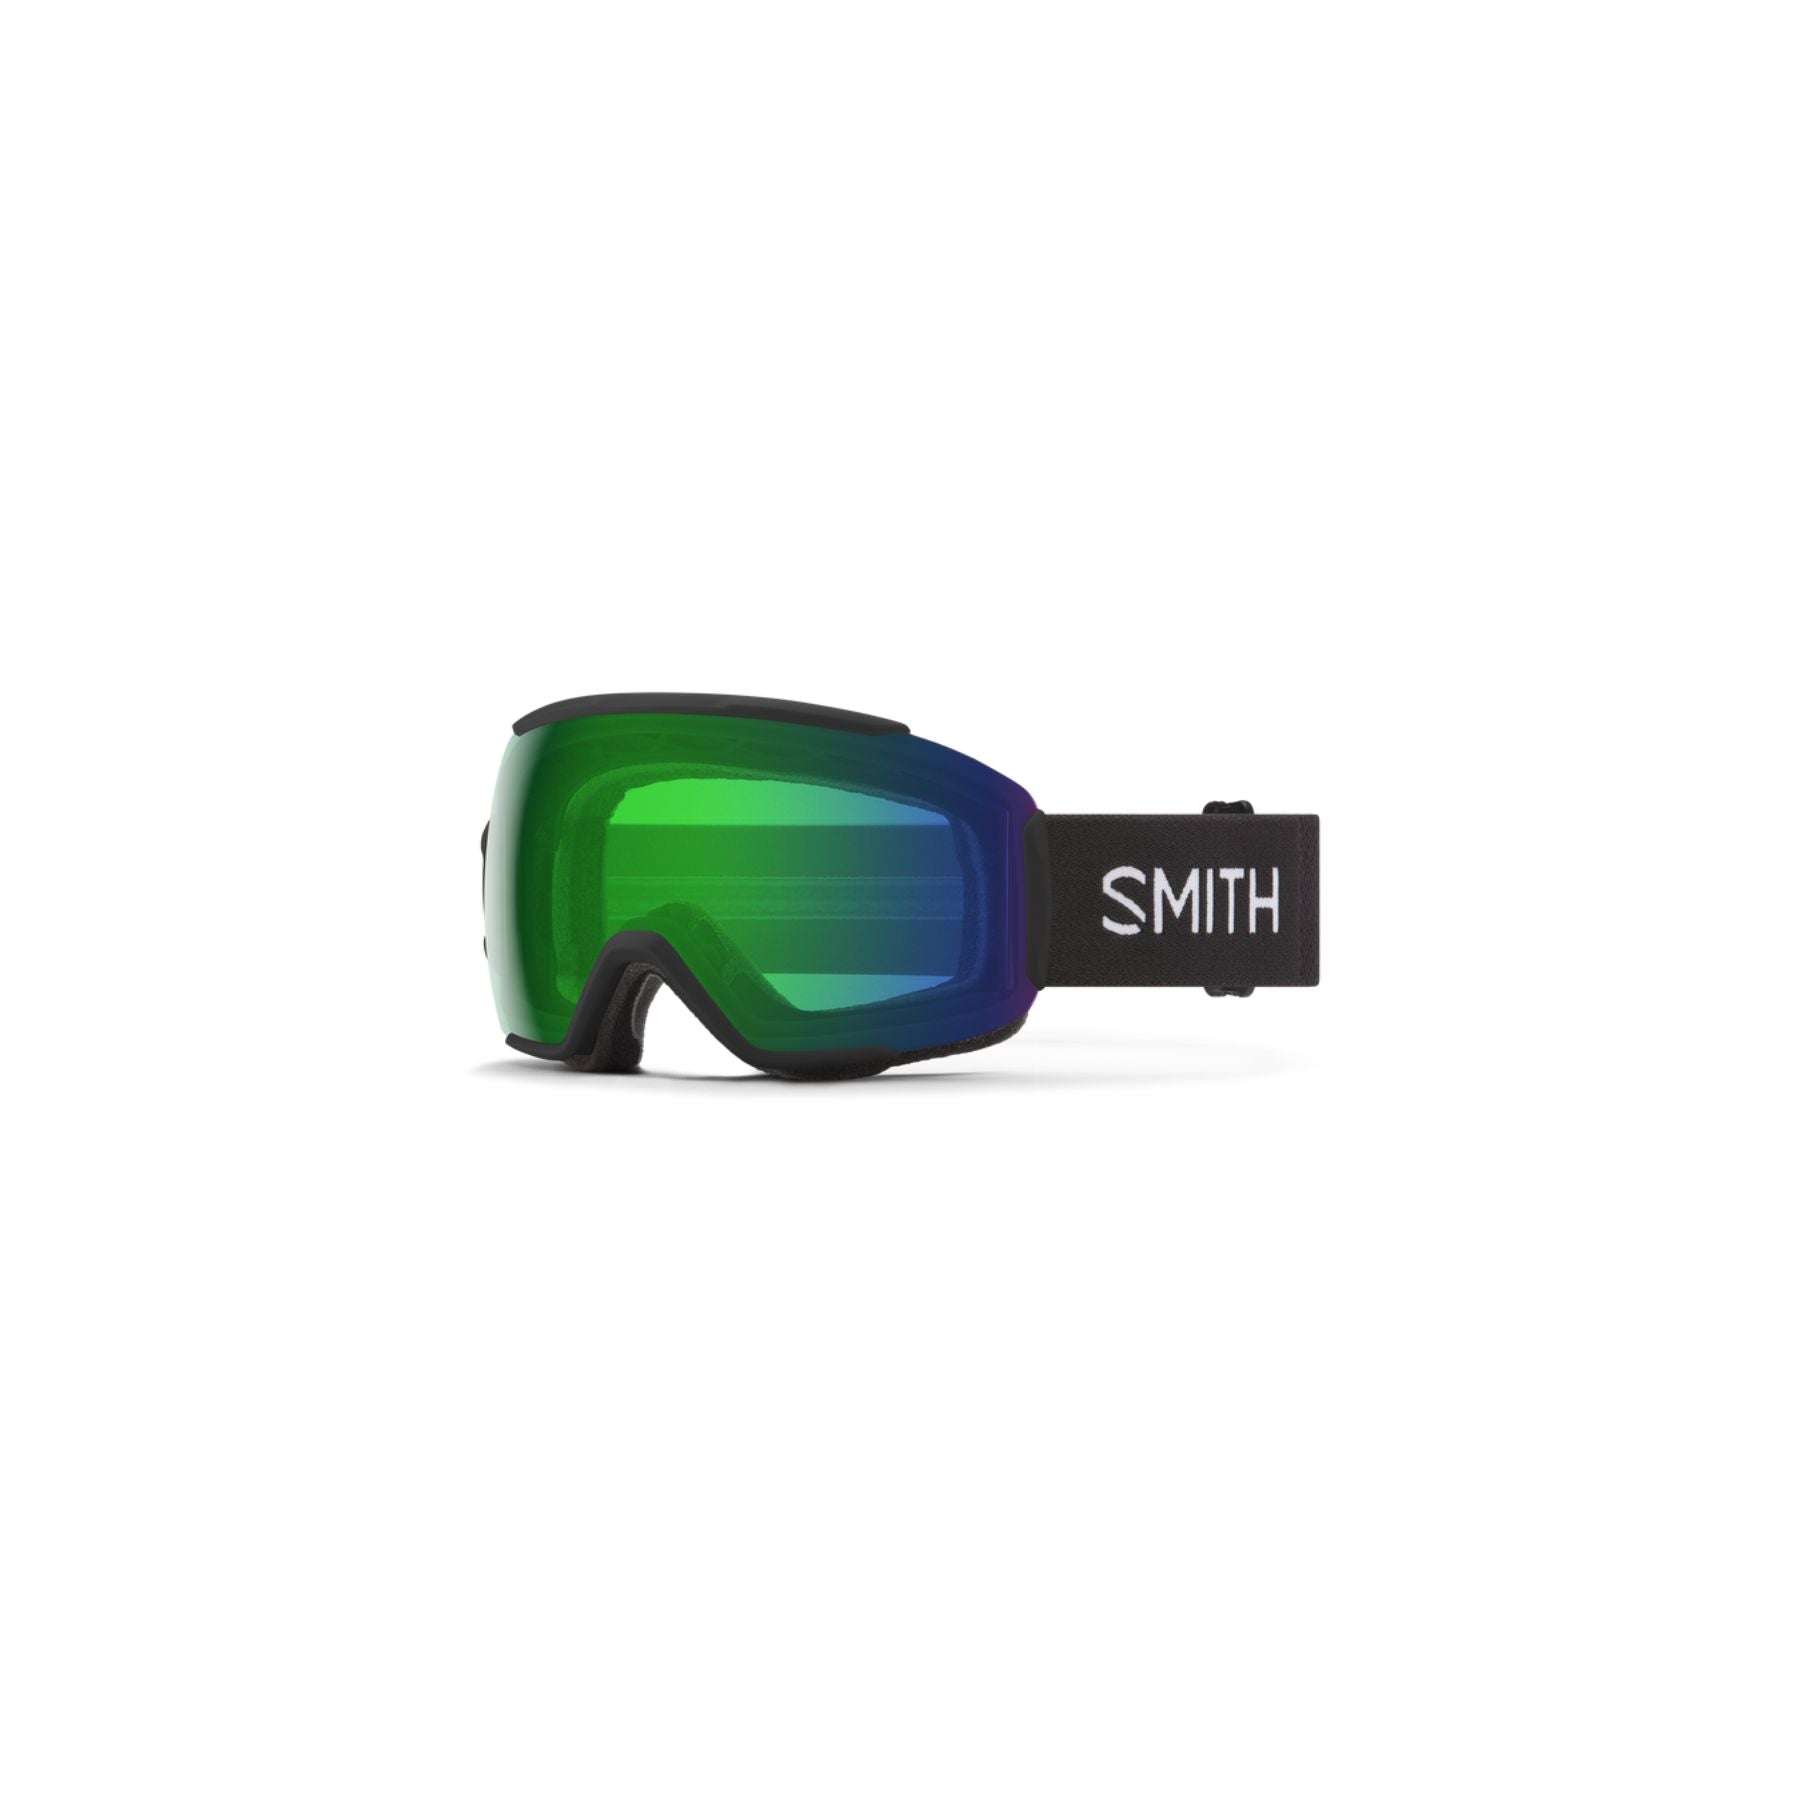 Smith Sequence OTG Goggles in Black